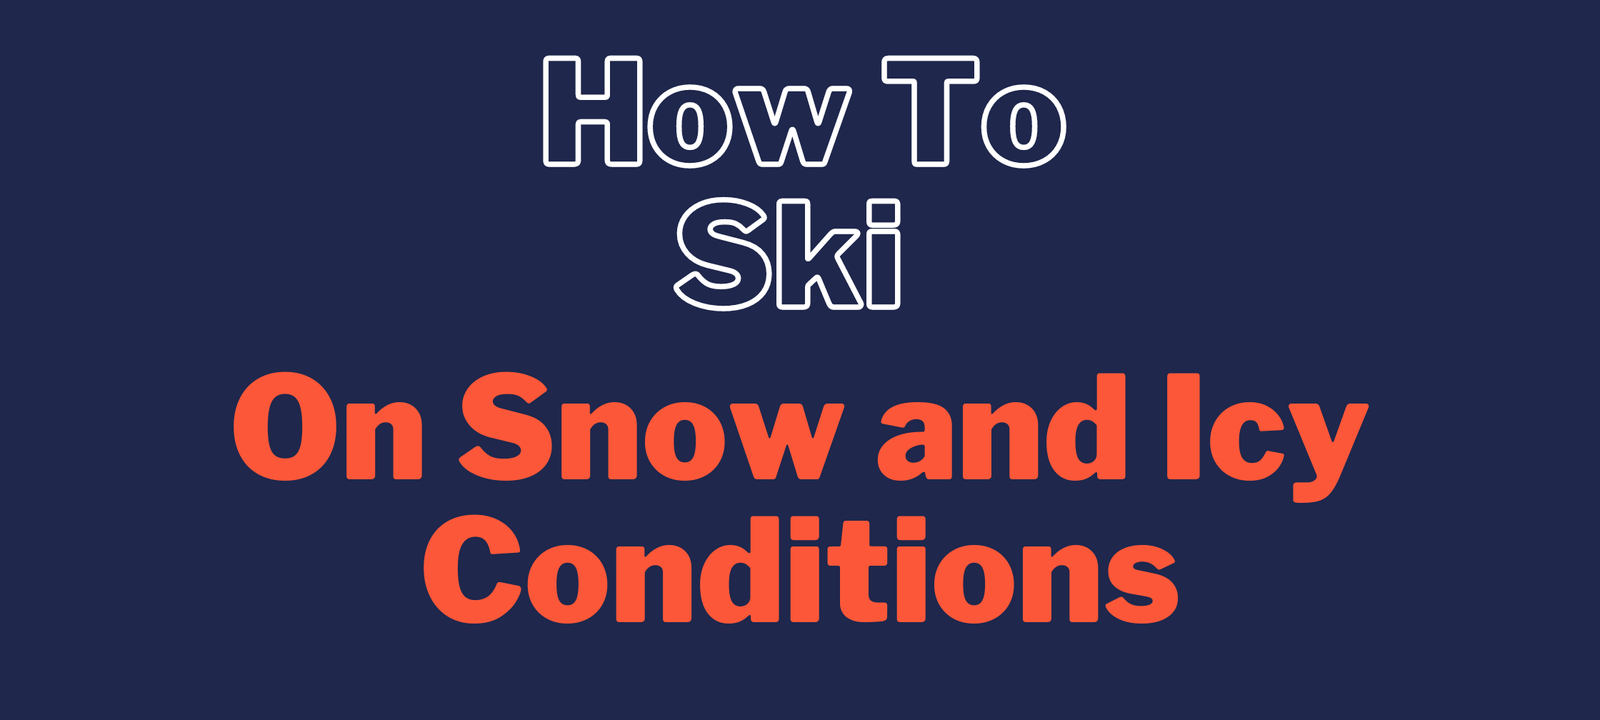 How to Ski on snow and icy conditions